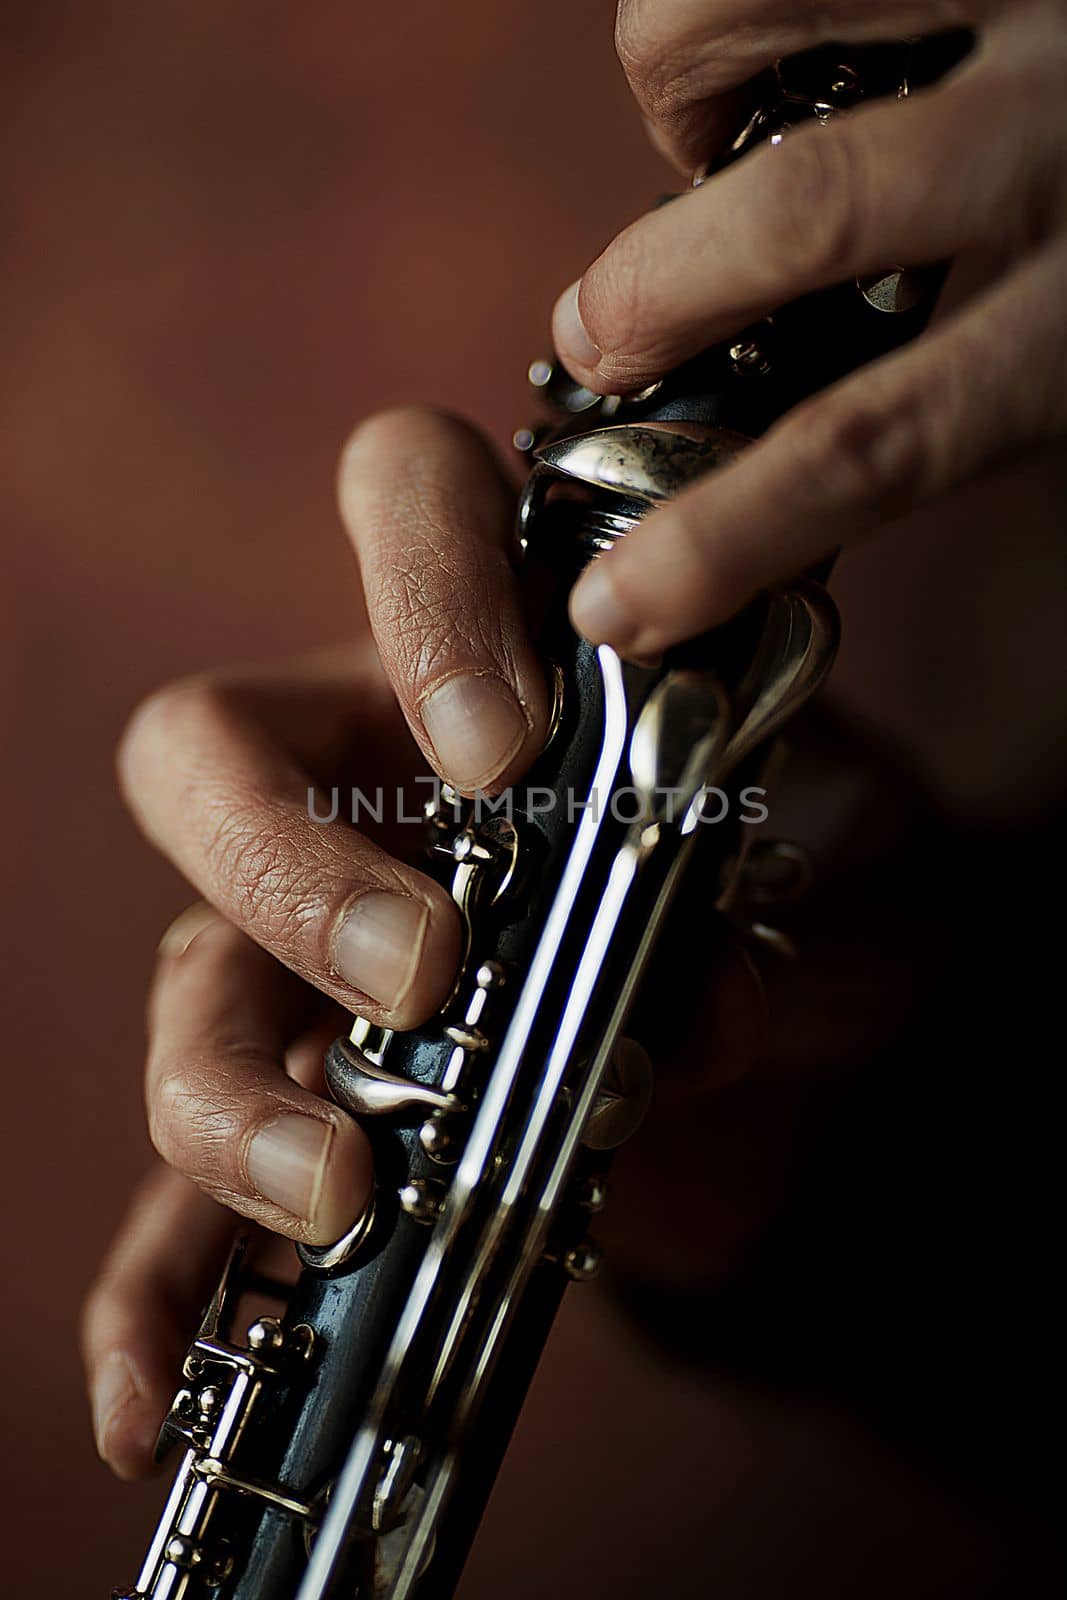 the hands of a musician on the clarinet - an ancient musical wooden instrument popular in classical brass marching jazz folk music, loved by children and adults, amateurs and professionals. by Costin